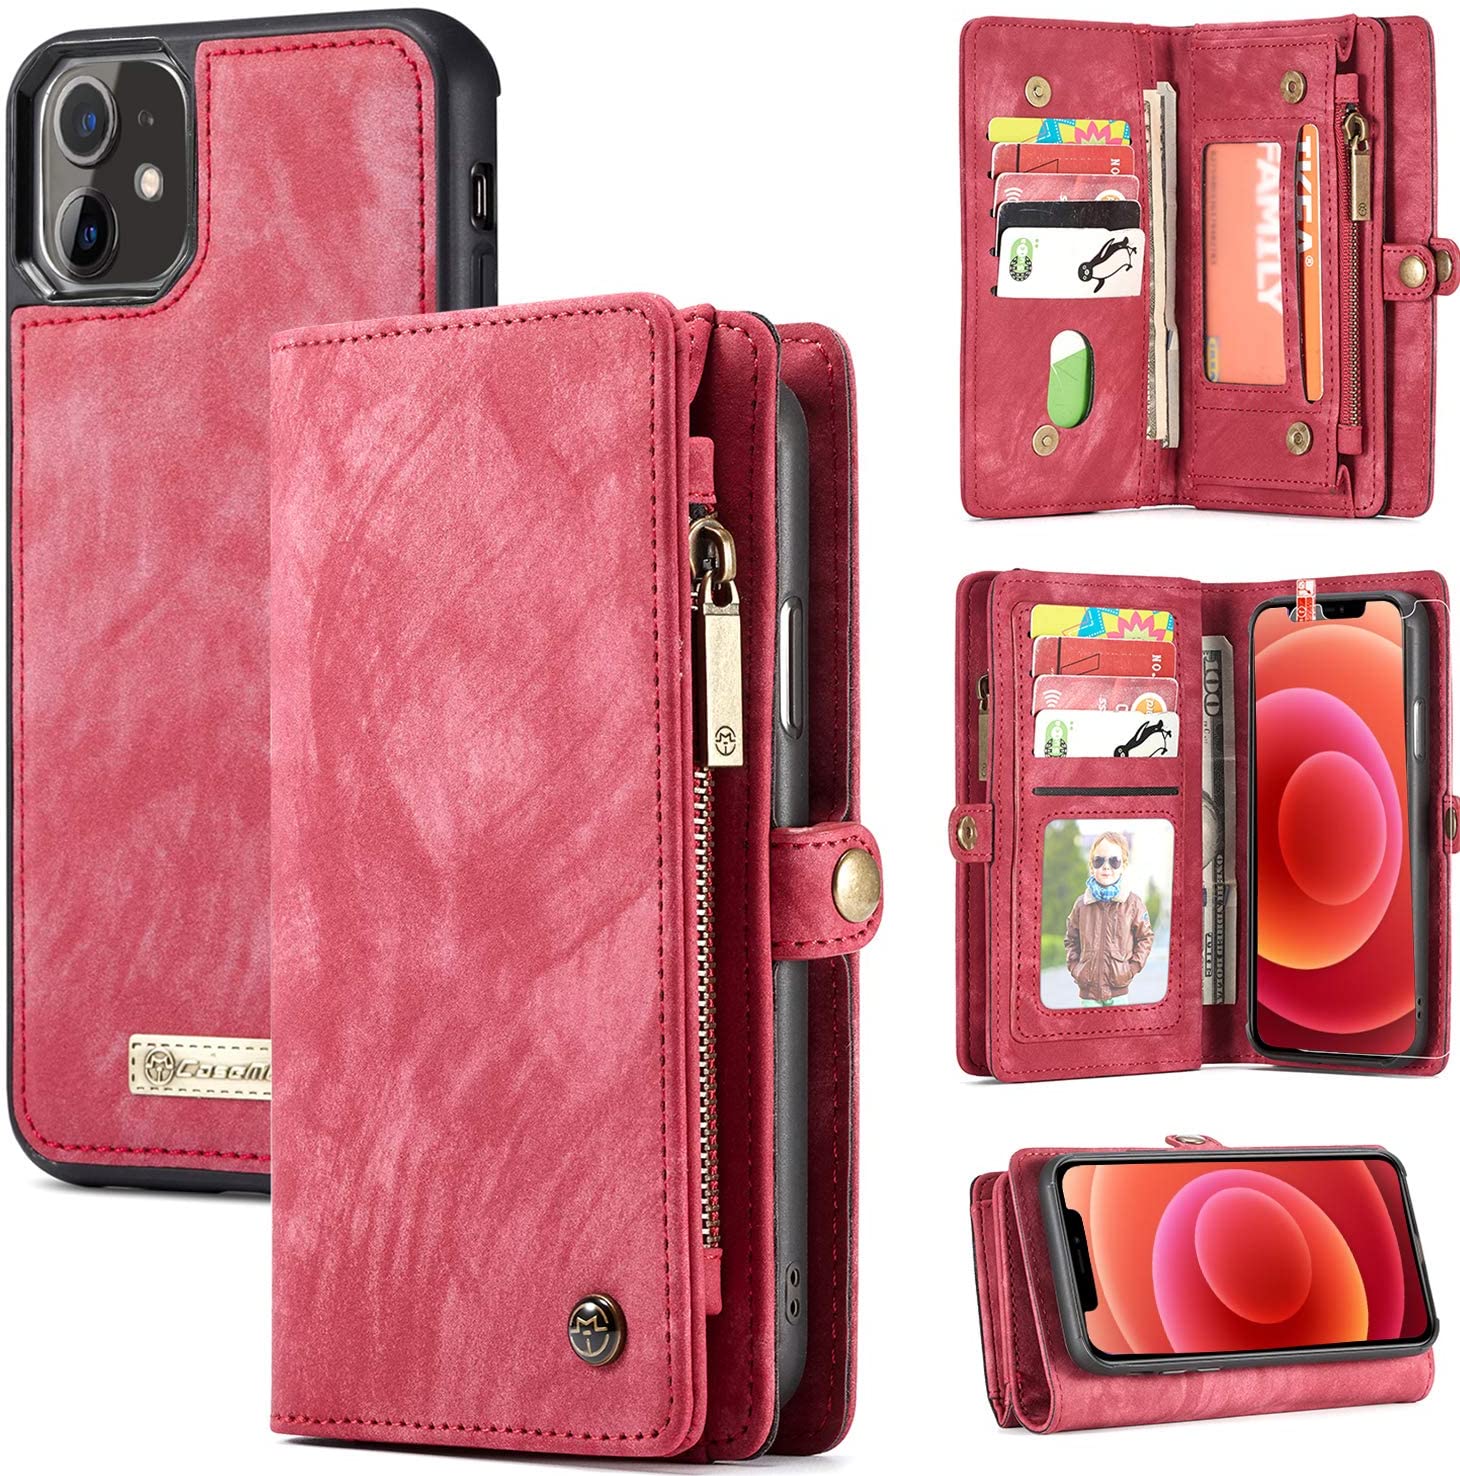 15 Most Beautiful Stylish iPhone 12 Wallet Cases for Women 2021